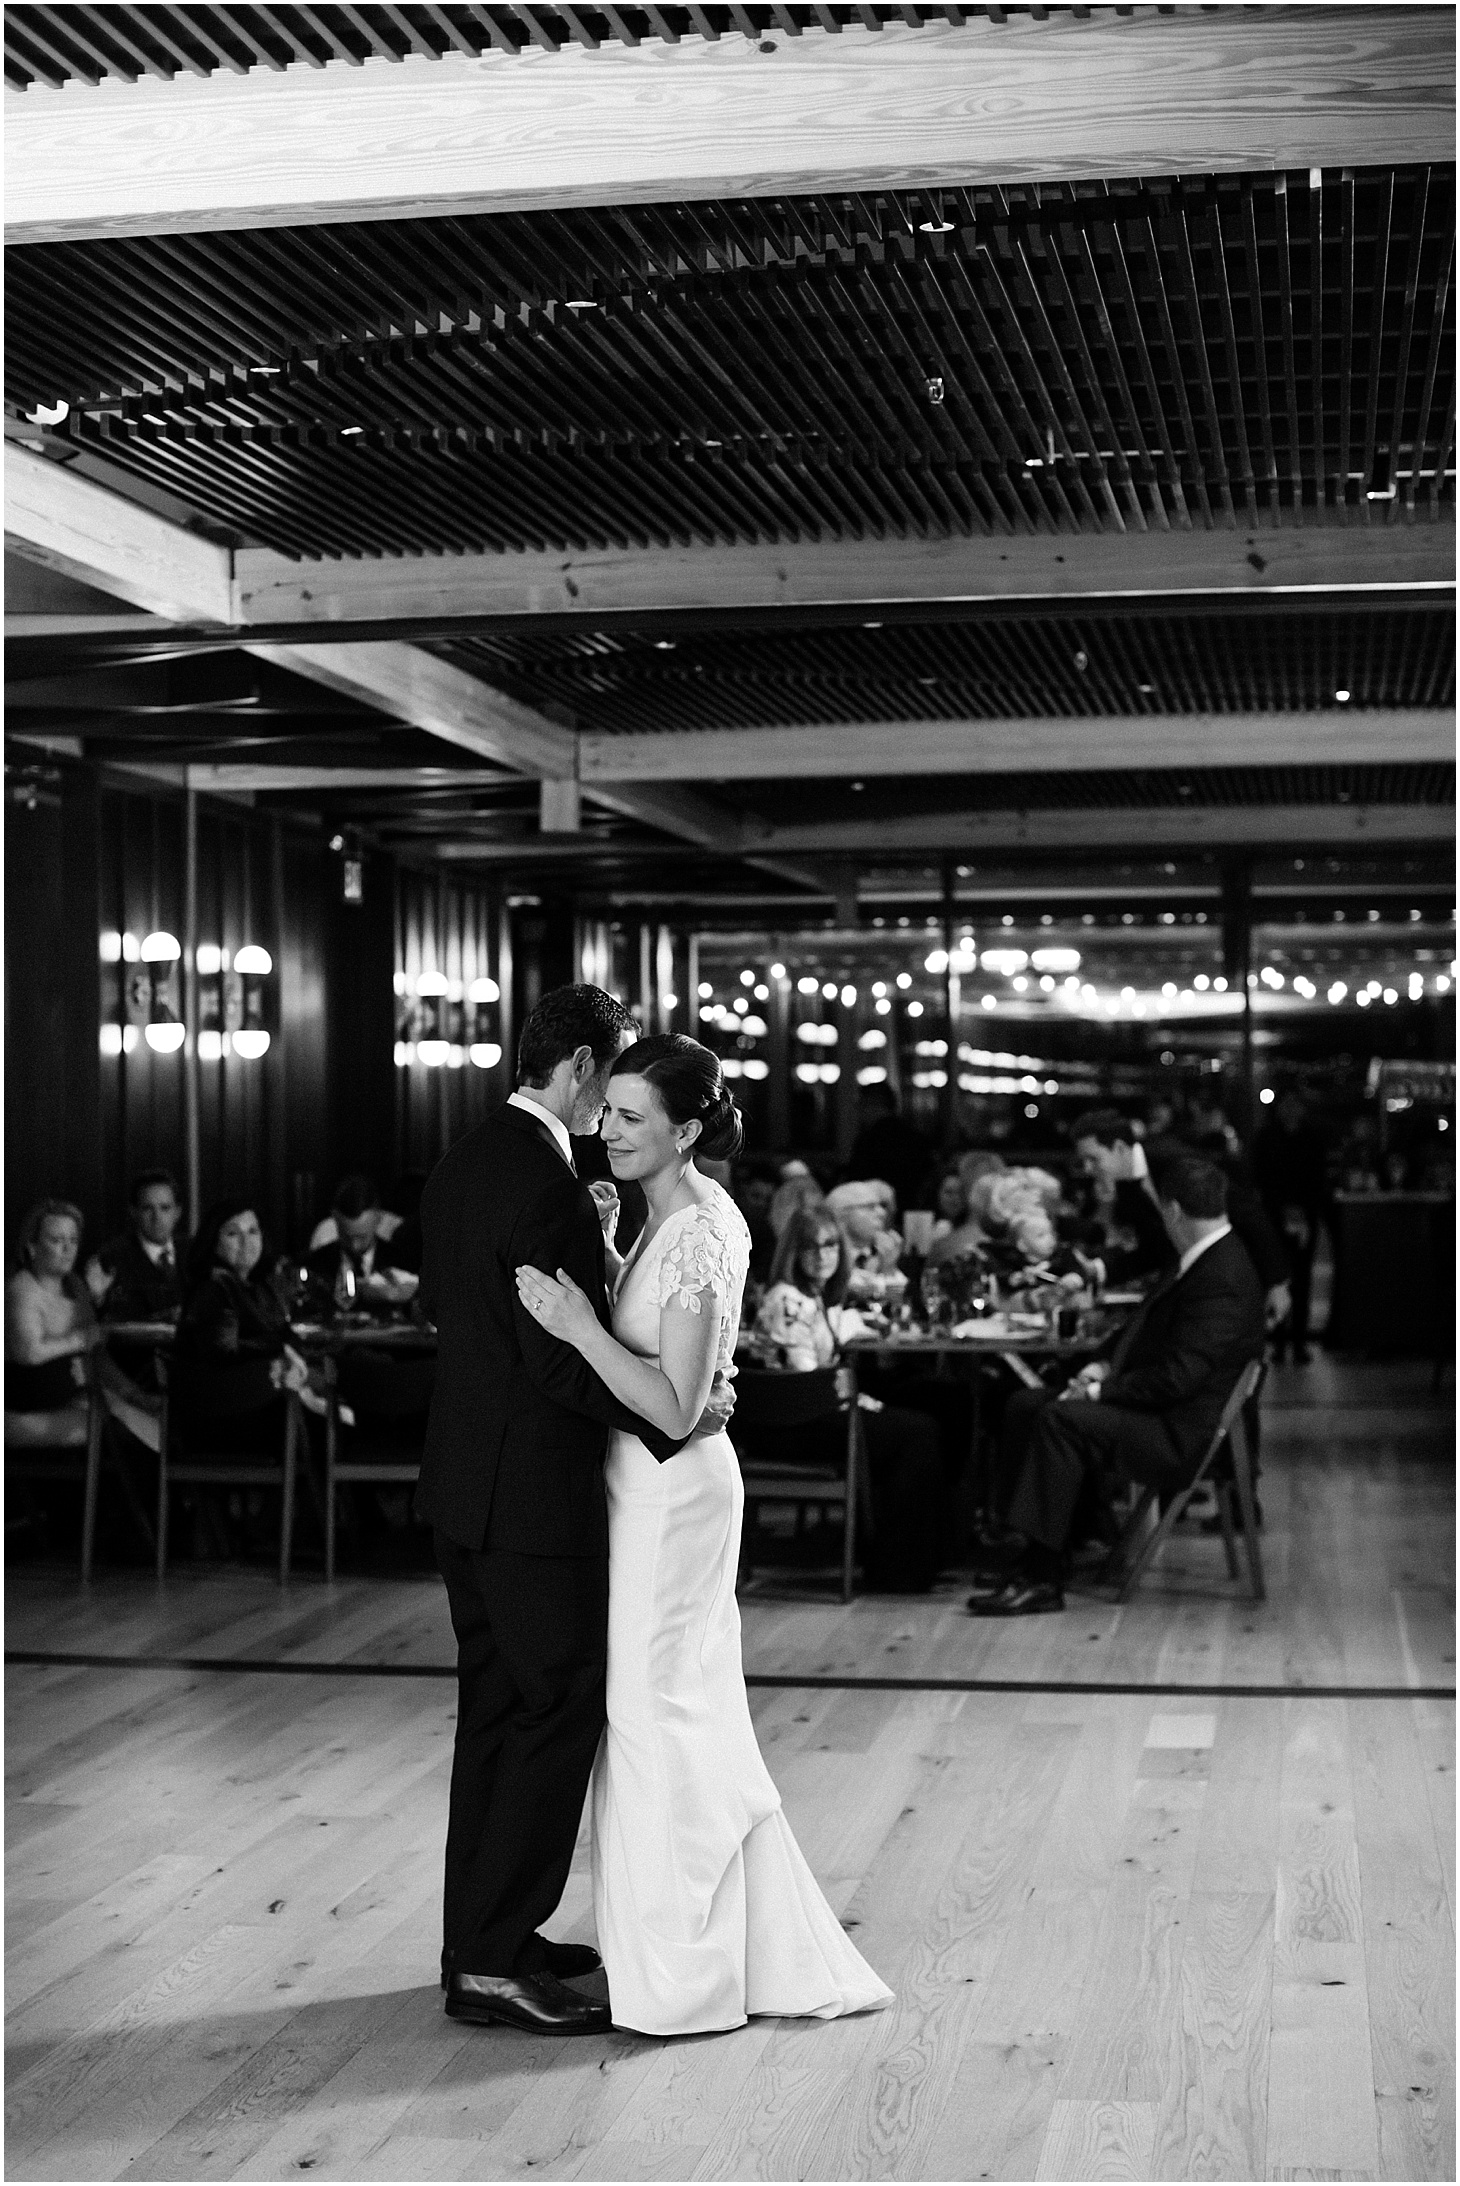 First Dance at District Winery Wedding Reception | Wedding Ceremony at Holy Rosary Church | Burgundy and Blush Wedding in Washington, DC | Sarah Bradshaw Photography